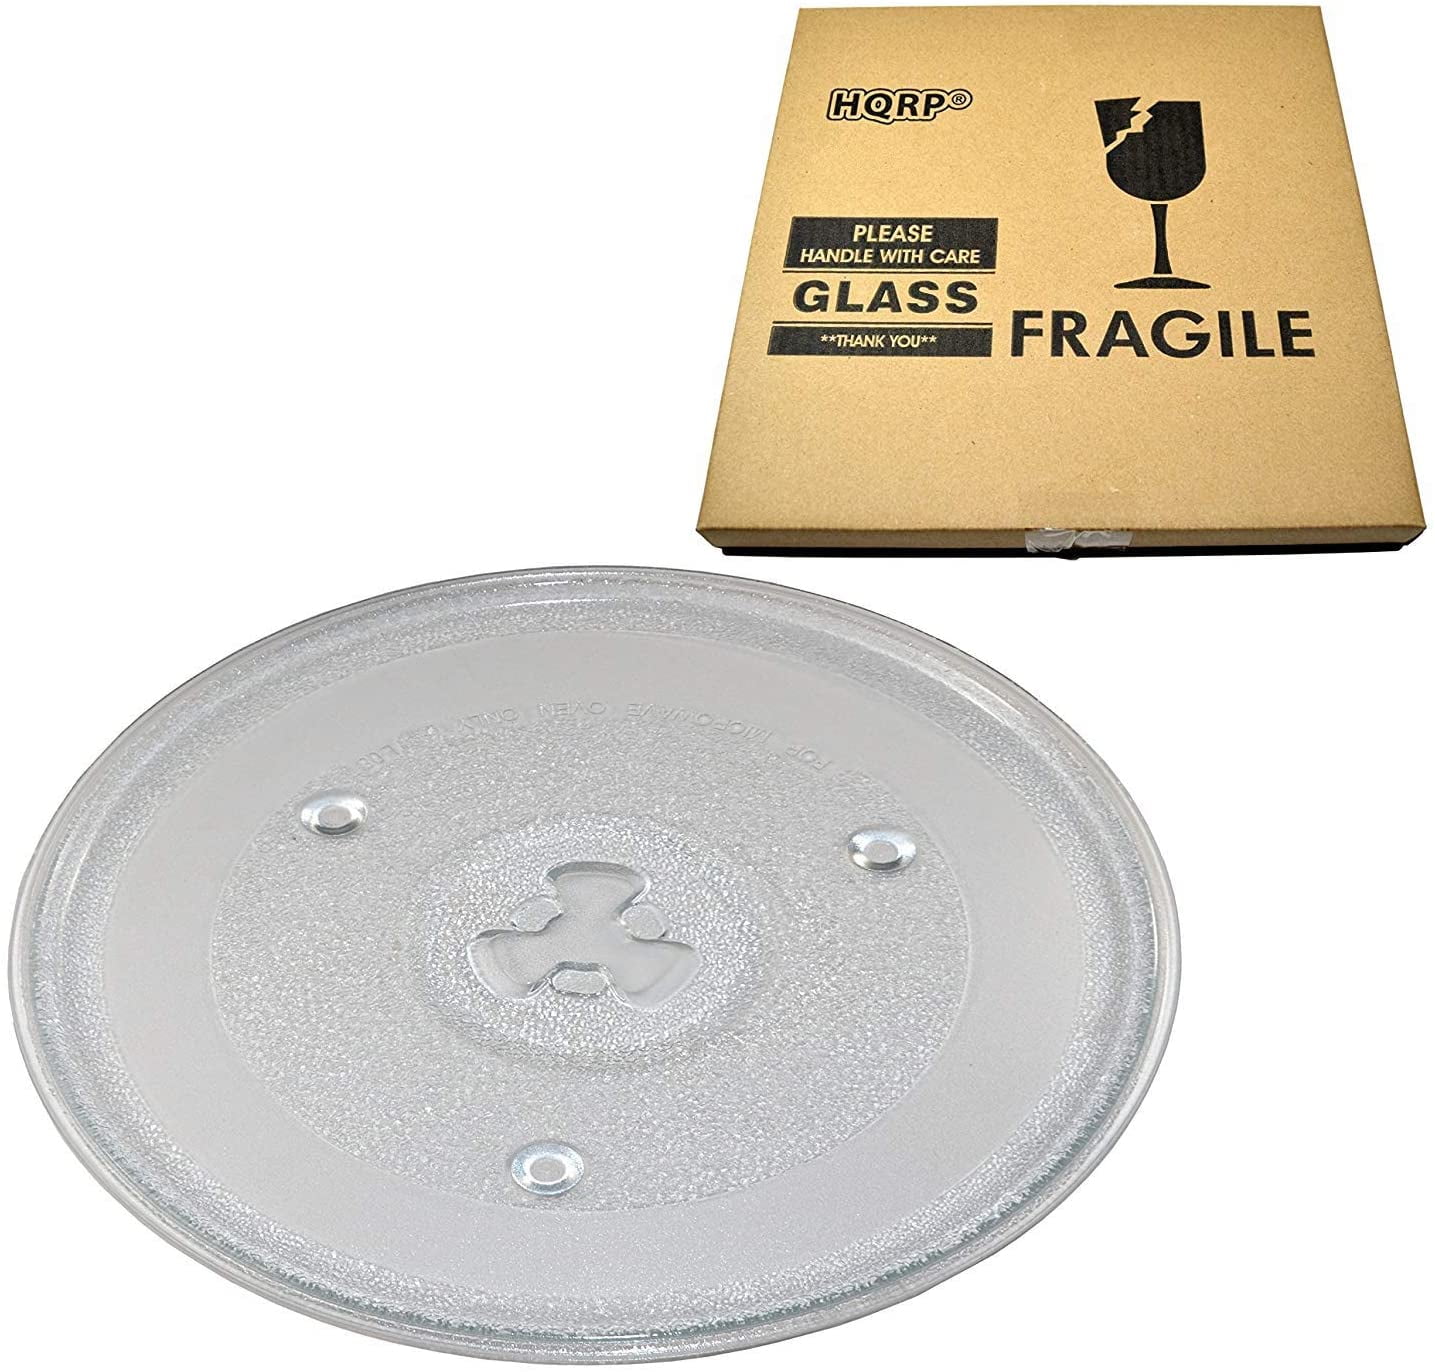 Original Samsung Microwave 255mm Glass Turntable Plate for M1713N 